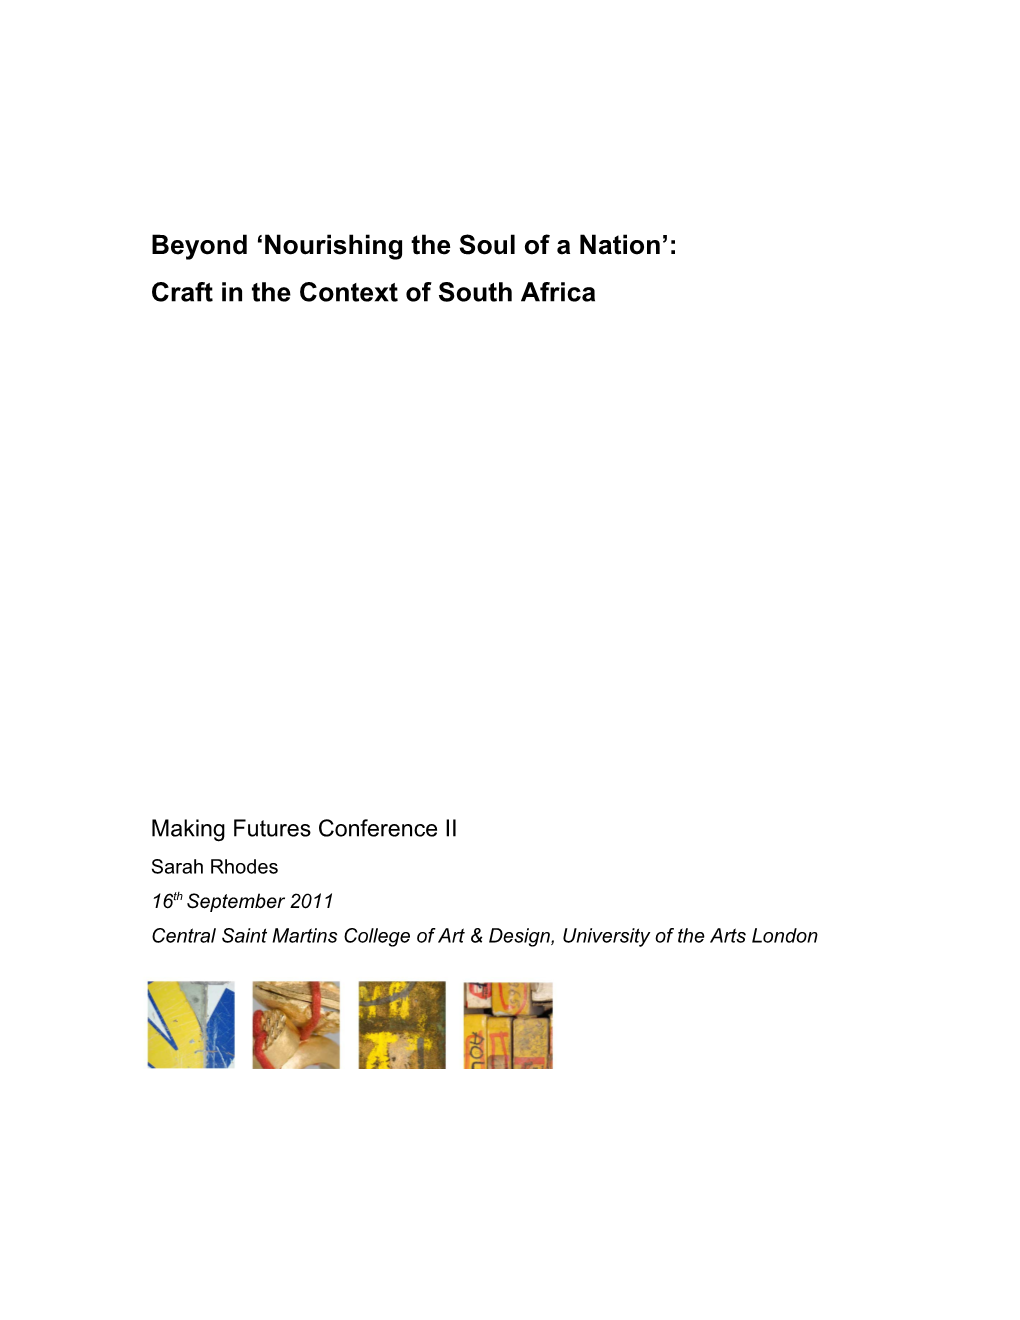 Beyond Nourishing the Soul of a Nation